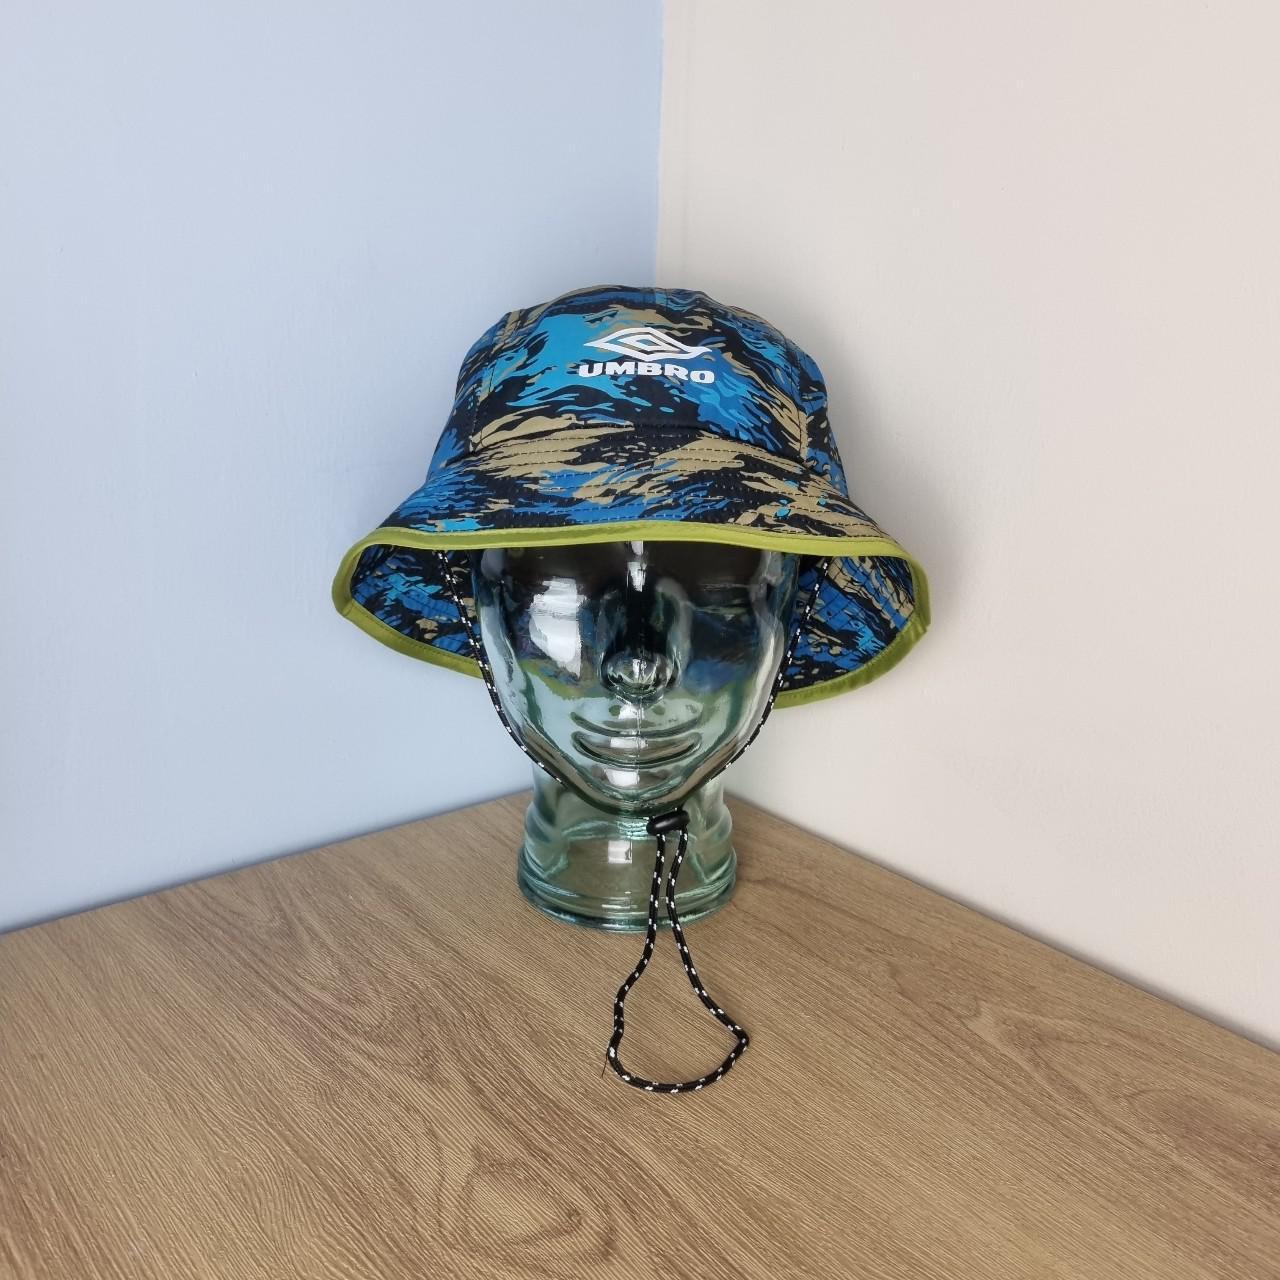 Vintage Style Umbro Bucket Hat - BRAND NEW WITH TAGS - Depop